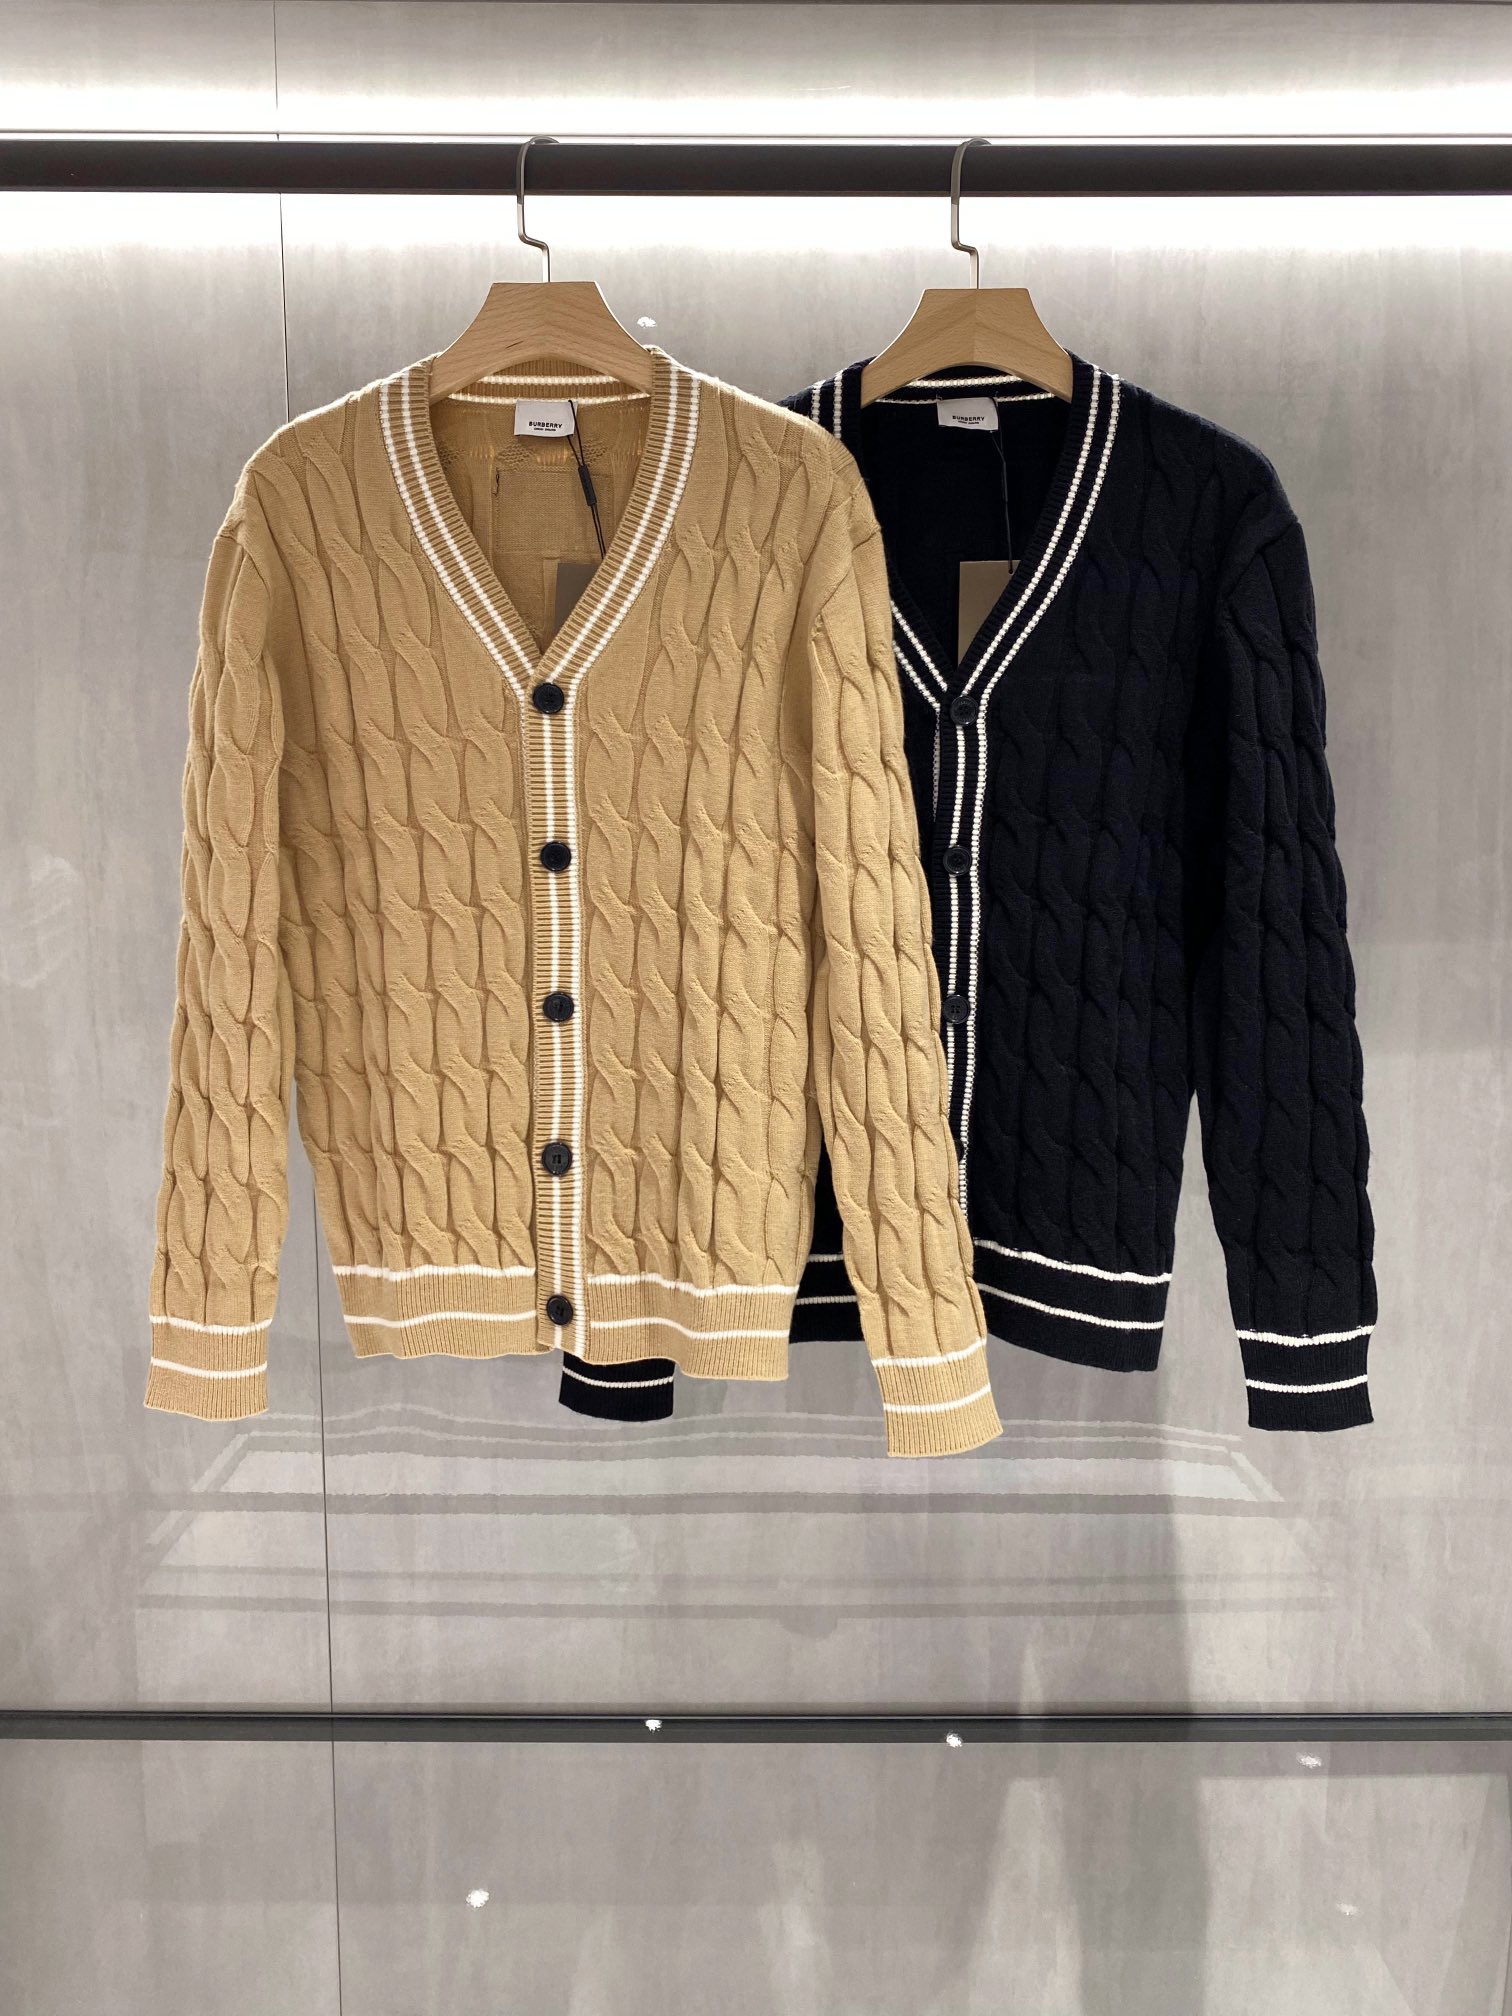 Burberry Clothing Cardigans Knit Sweater Unisex Knitting Wool Fall/Winter Collection Fashion LL1670320